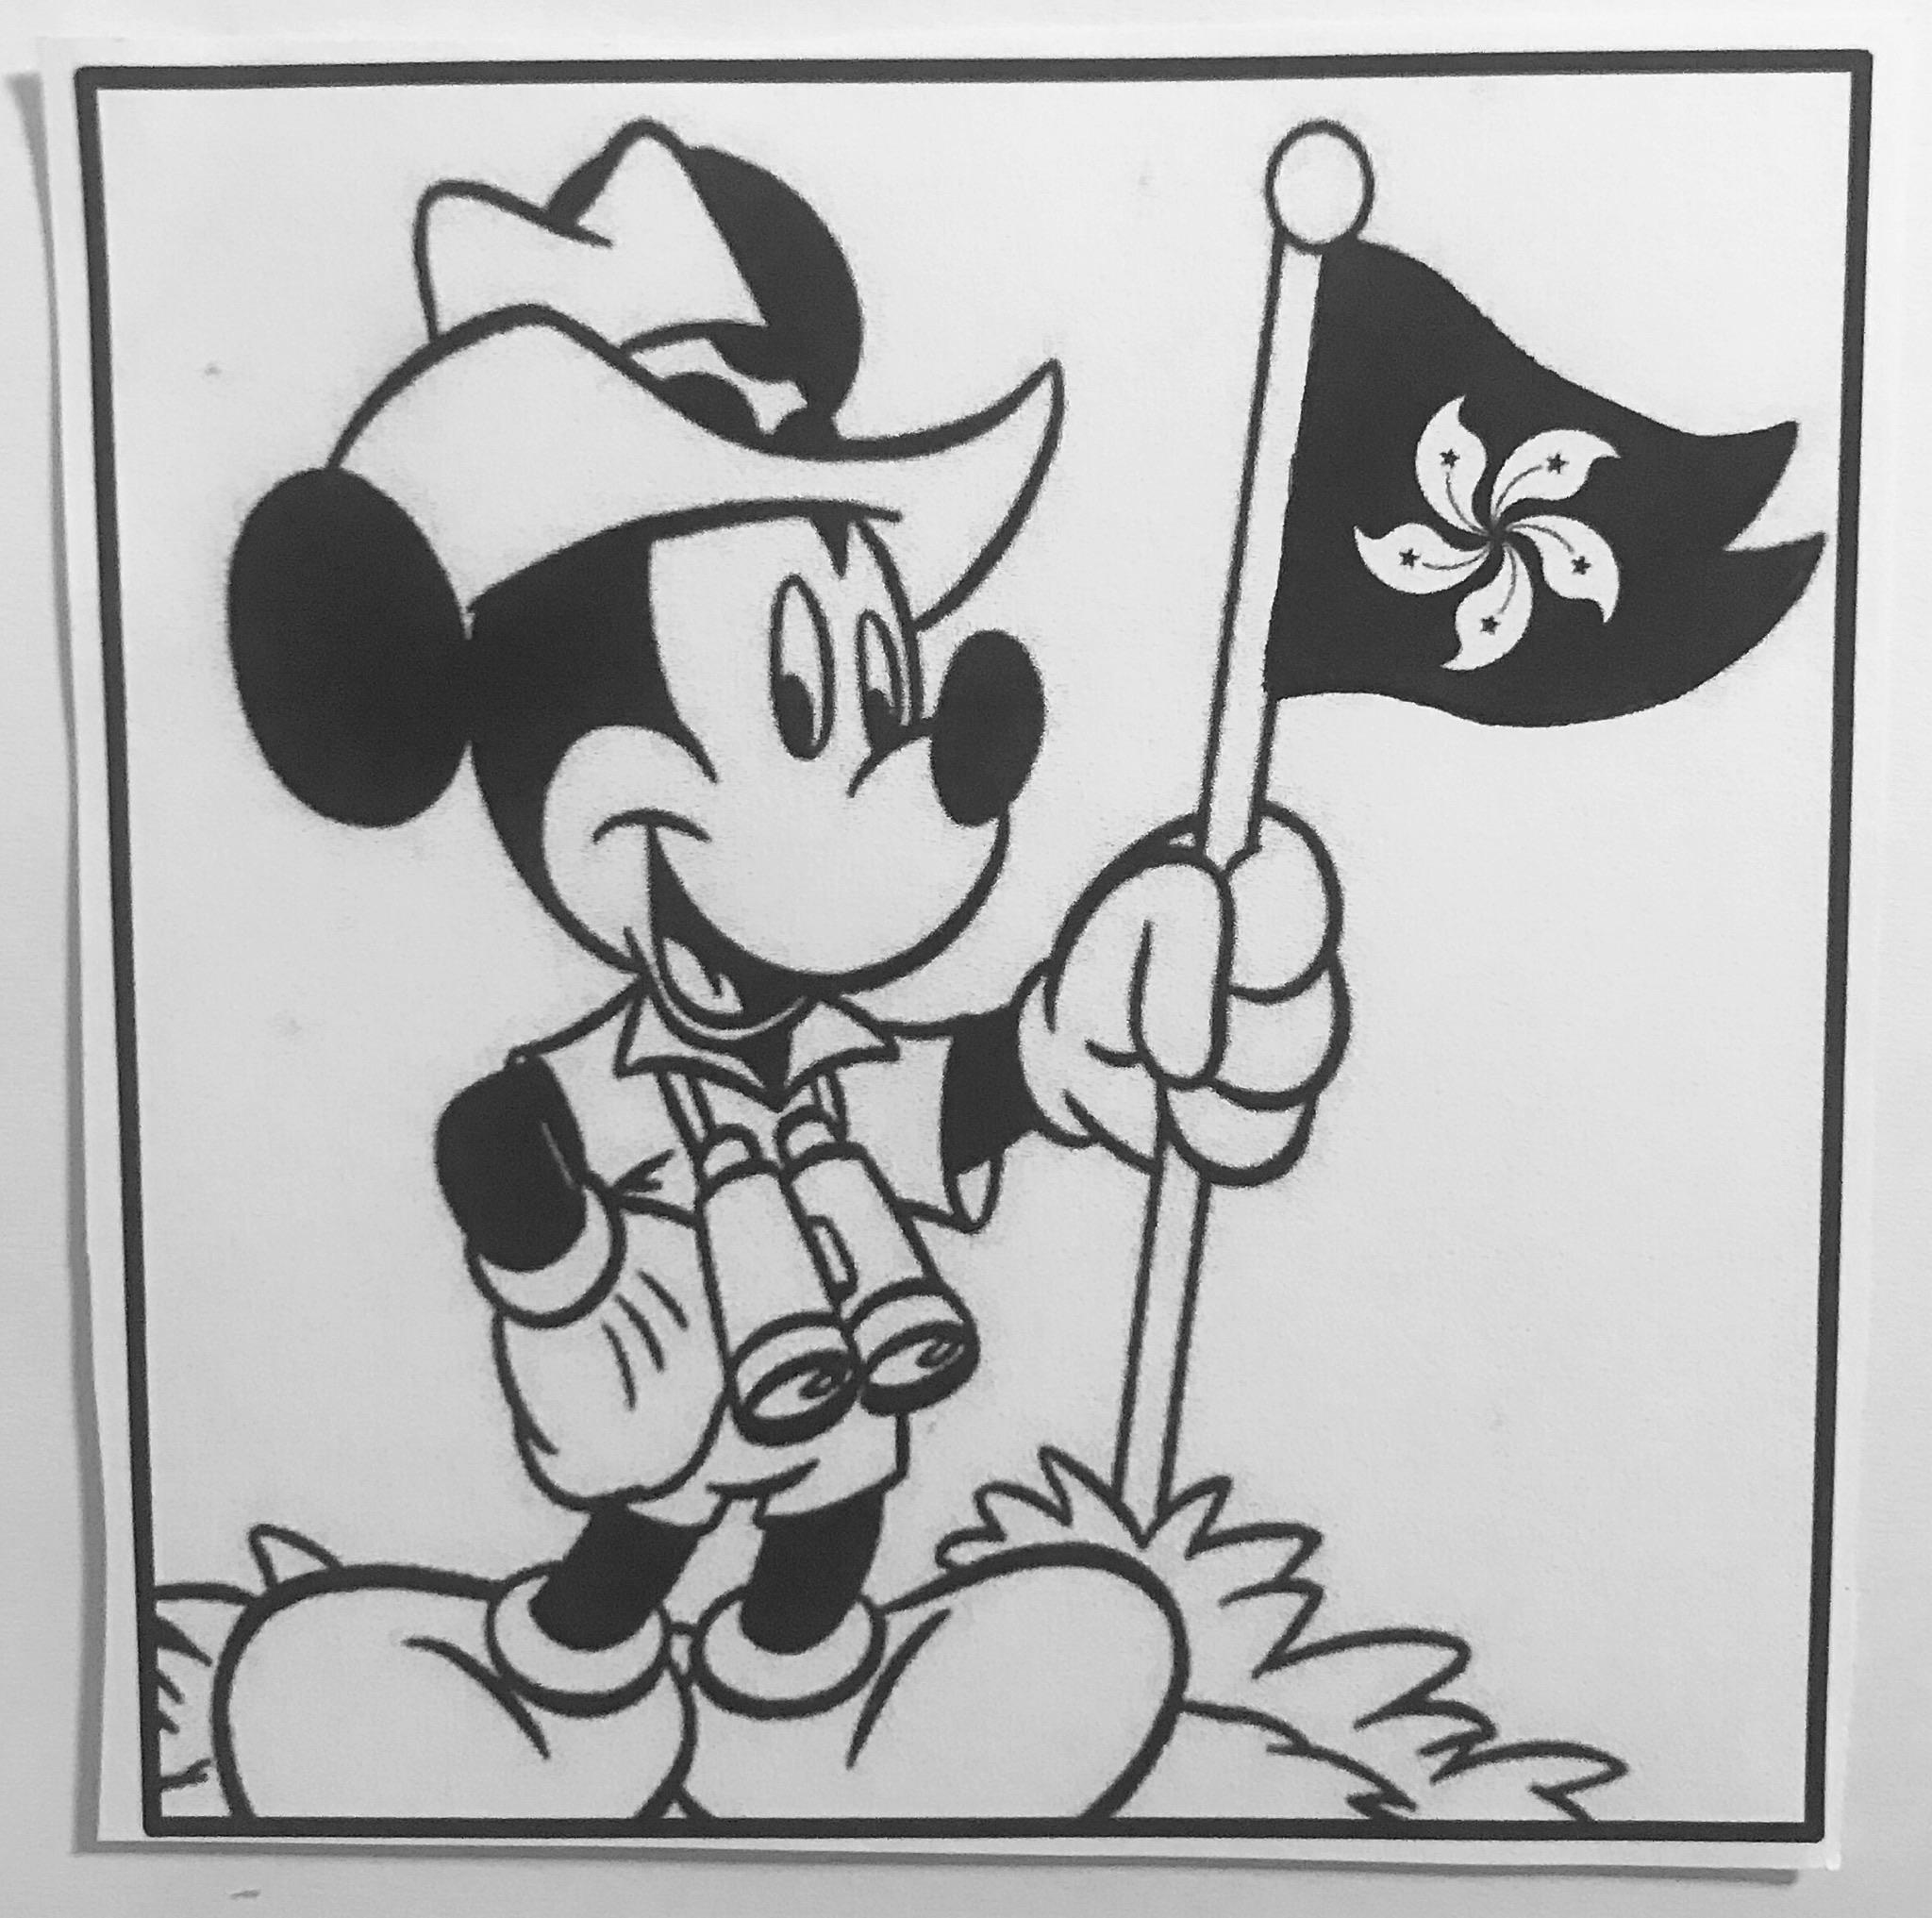 ...even Mickey supports HK.